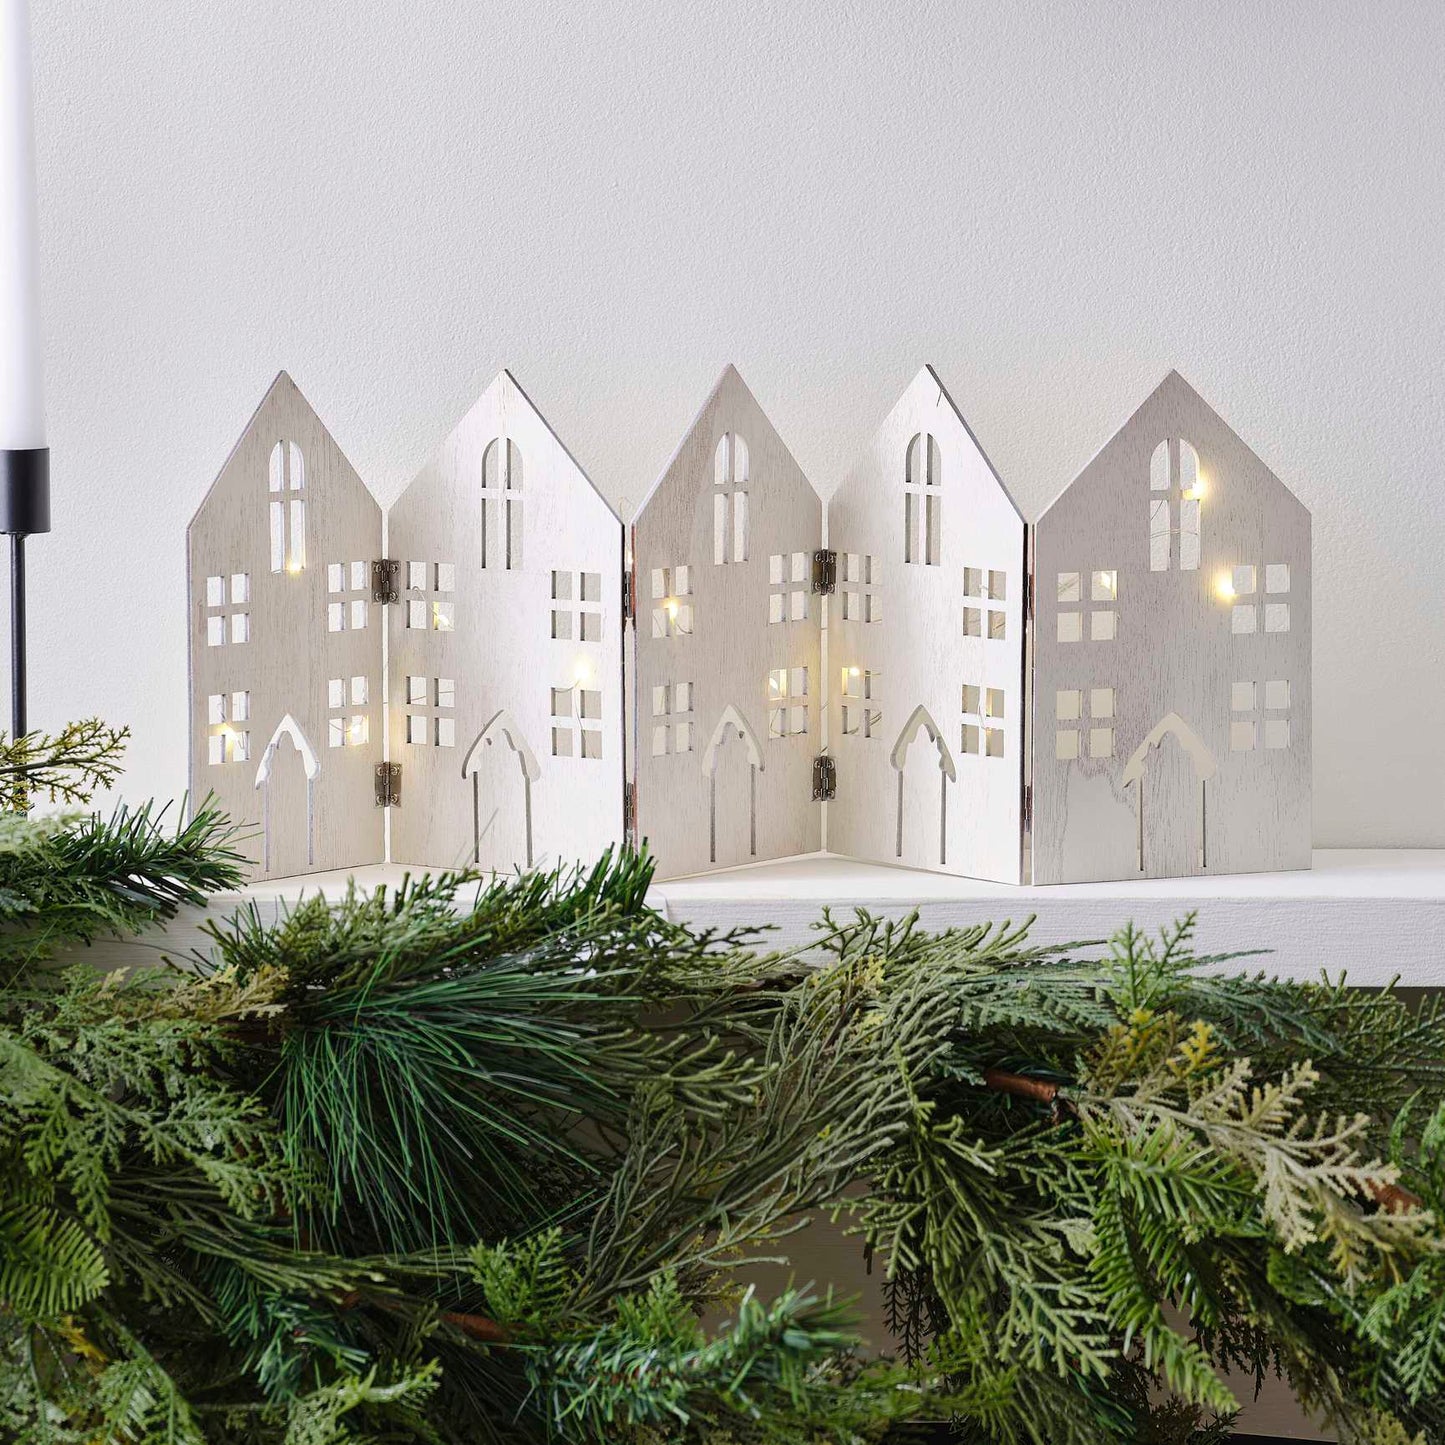 Fold Out Wooden Christmas Houses with String Lights